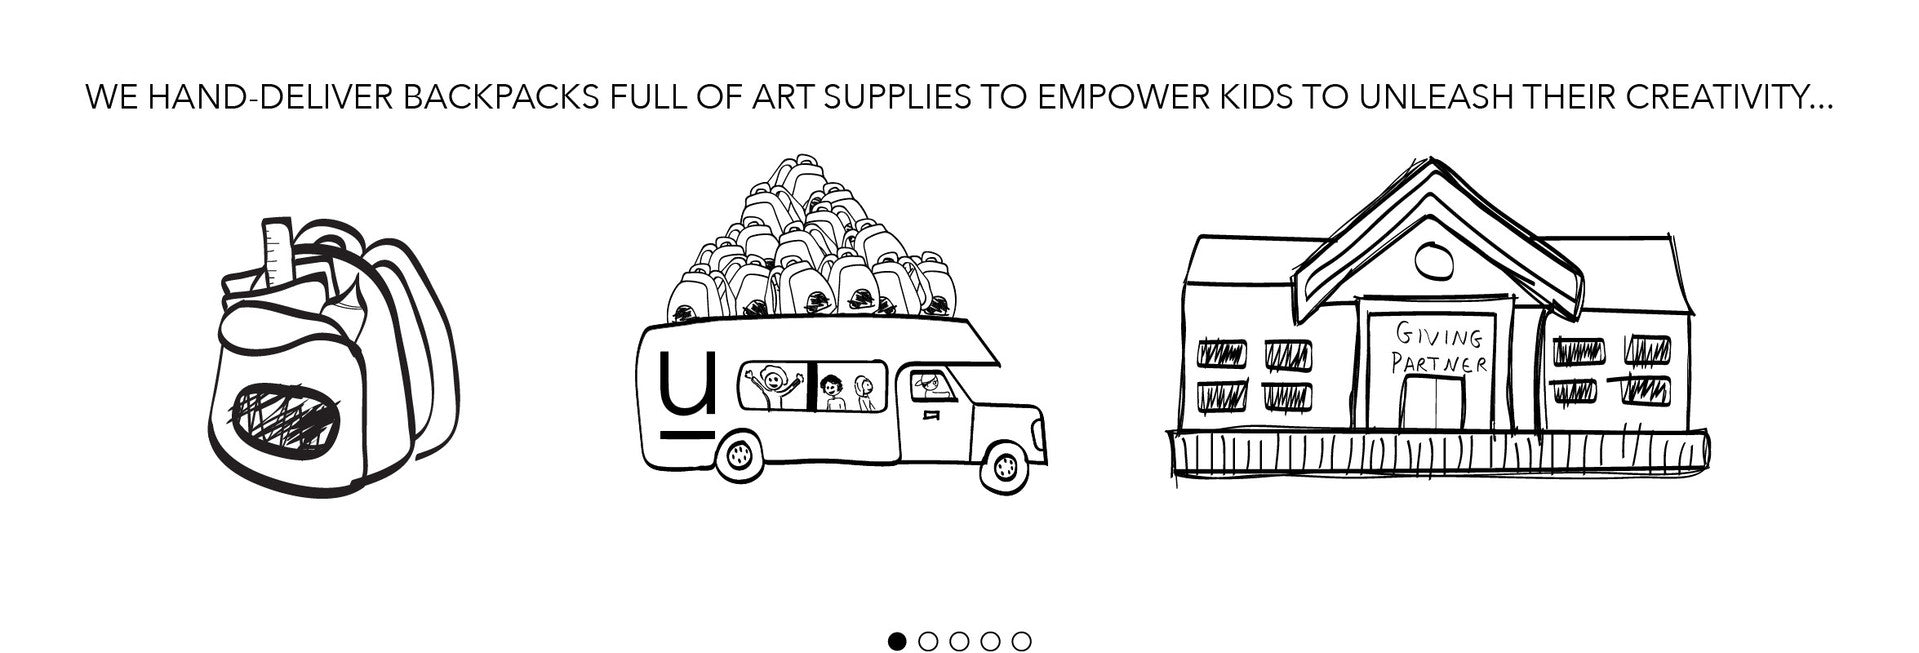 we hand-deliver backpacks full of art supplies to empower kids to unleash their creativity...